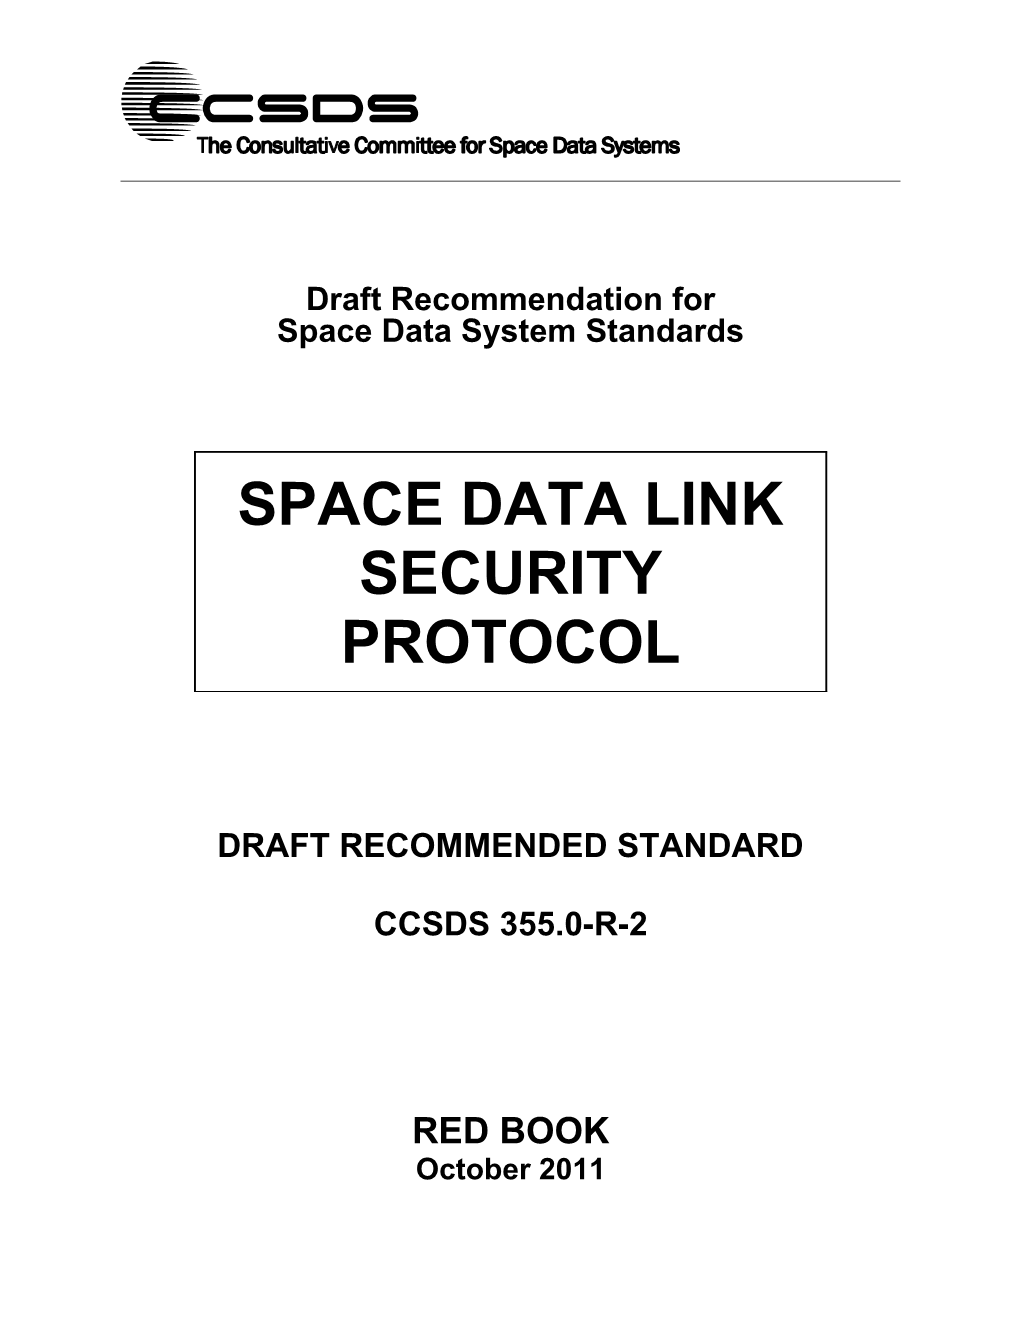 Space Data Link Security Protocol